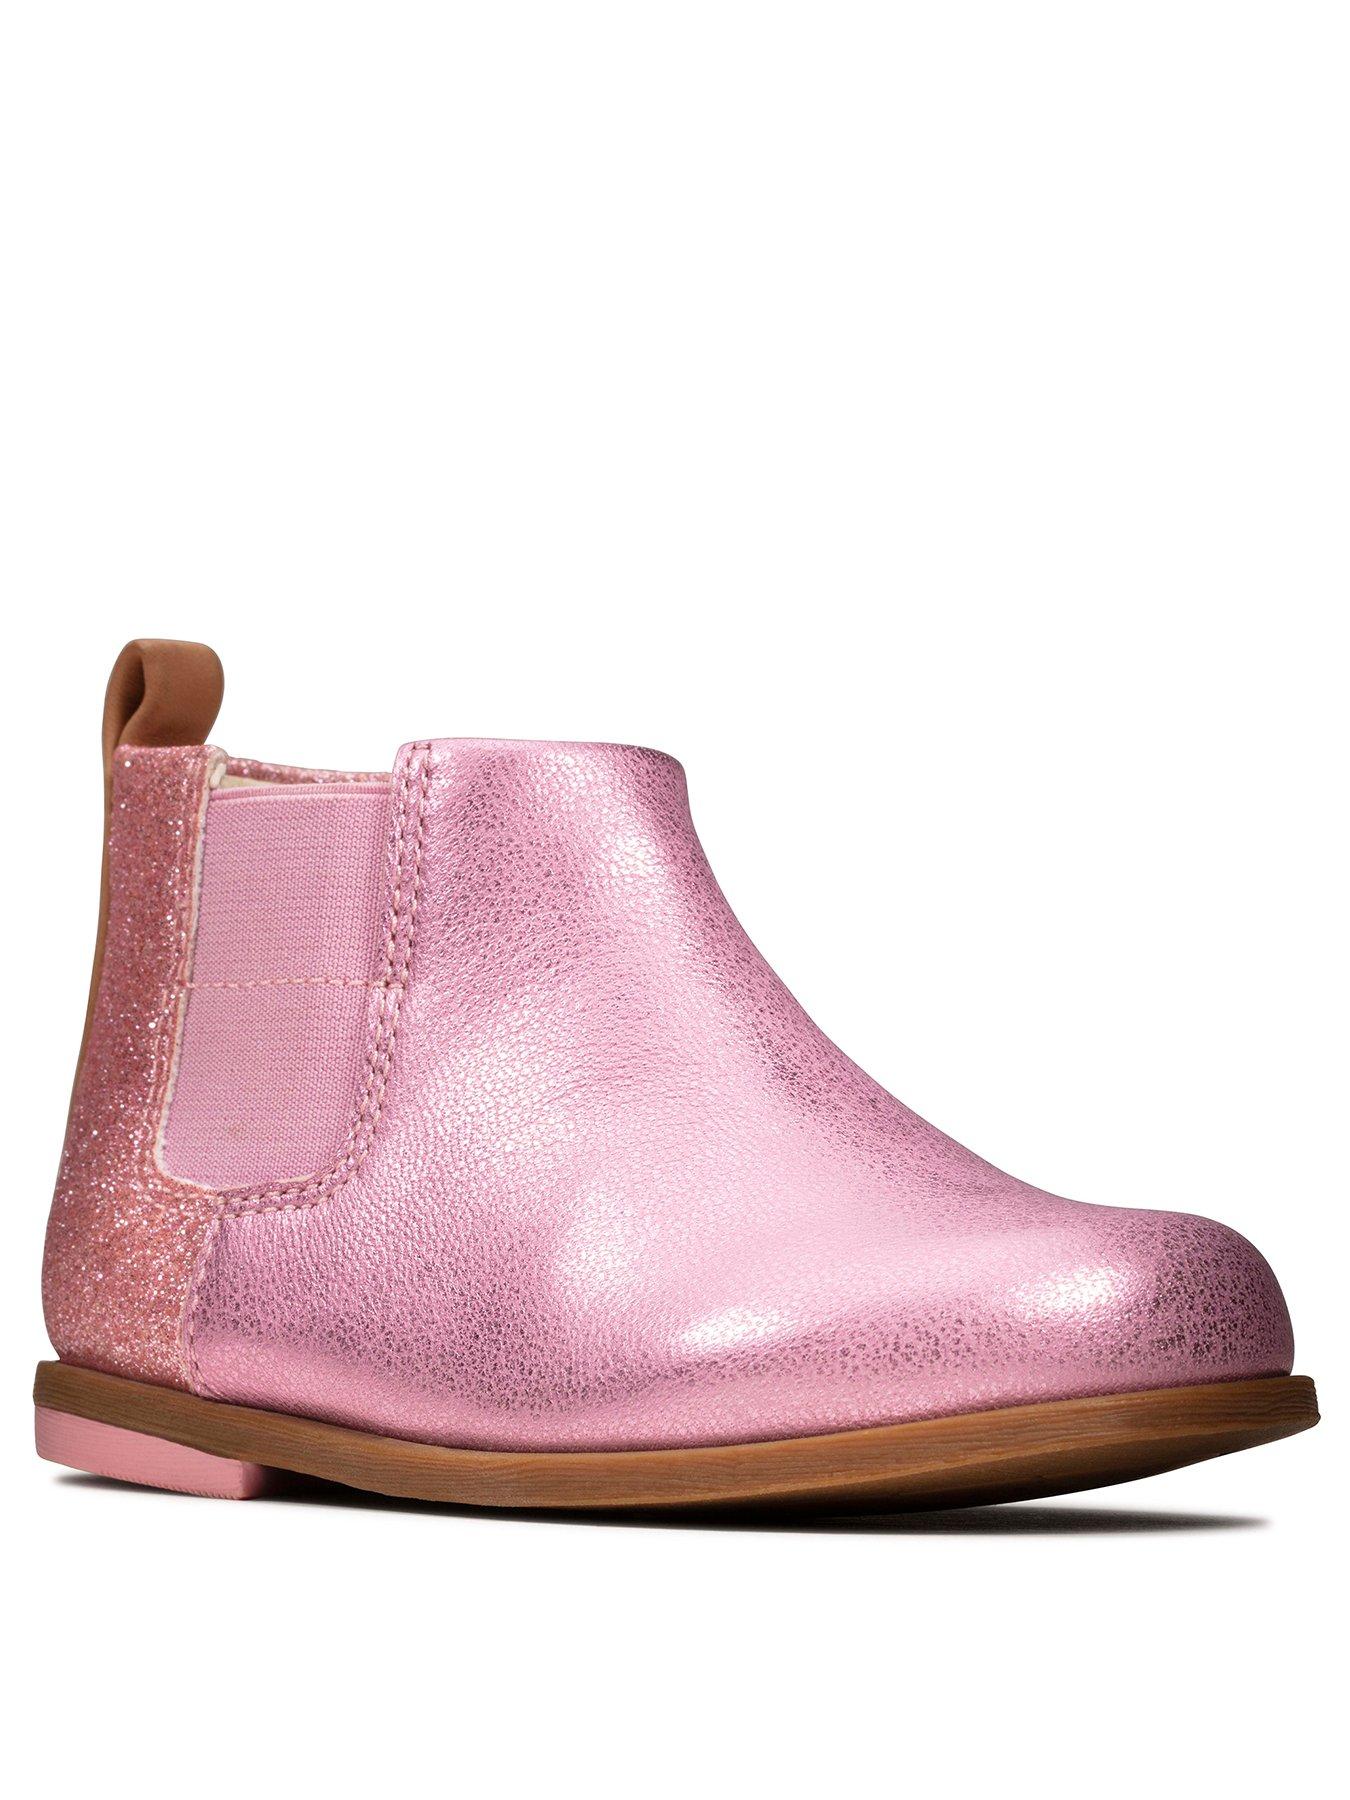 clarks childrens chelsea boots